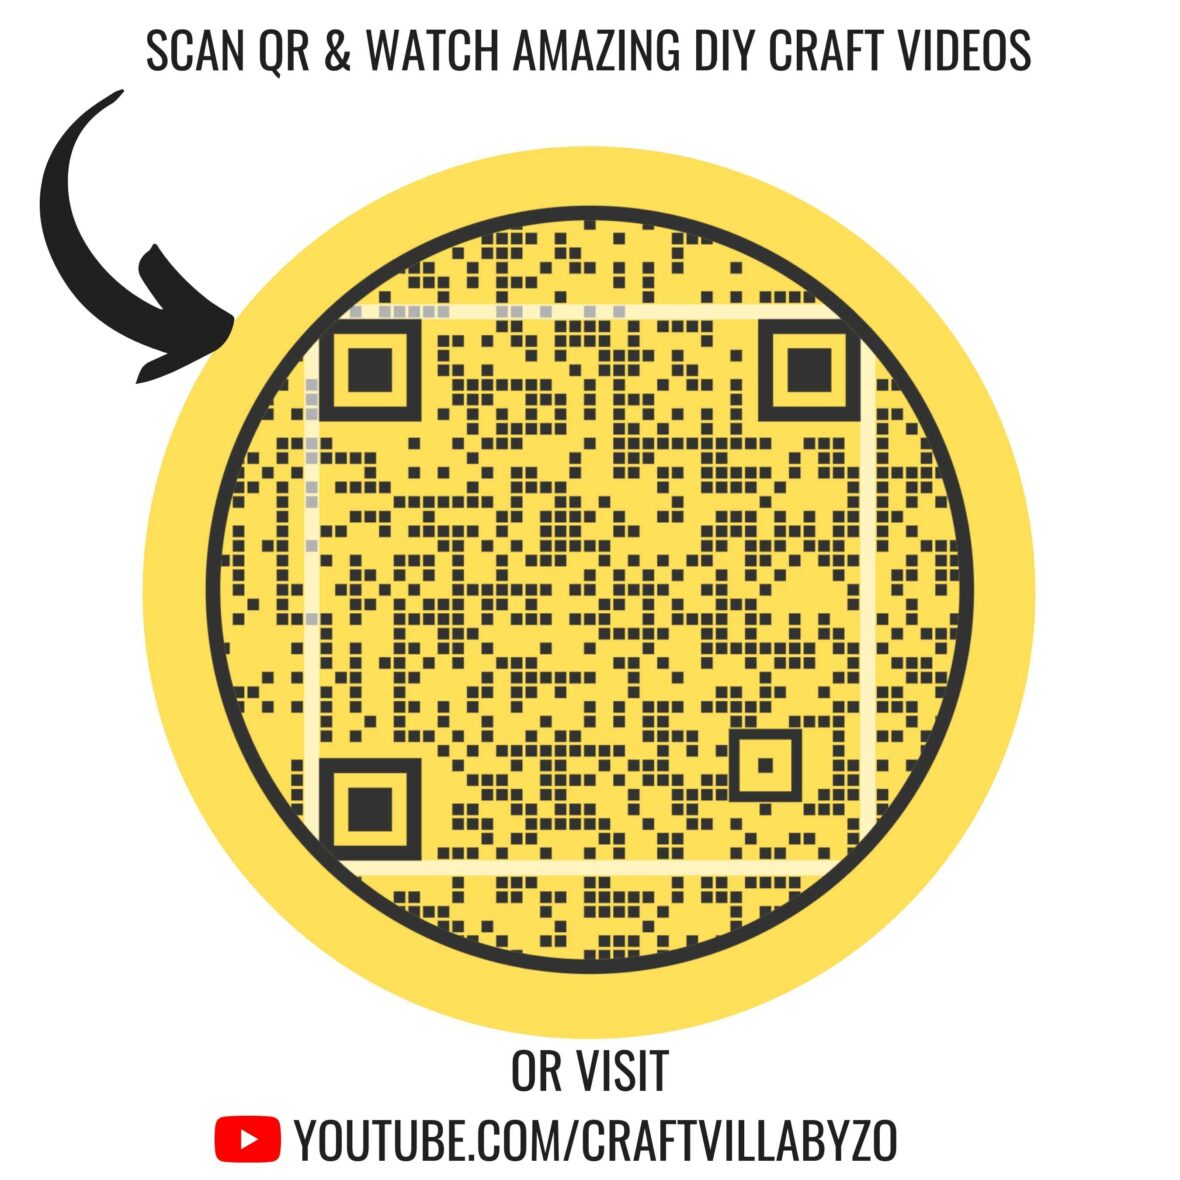 SCAN QR CODE AND GET DIY CRAFT IDEAS OF OUR PRODUCTS